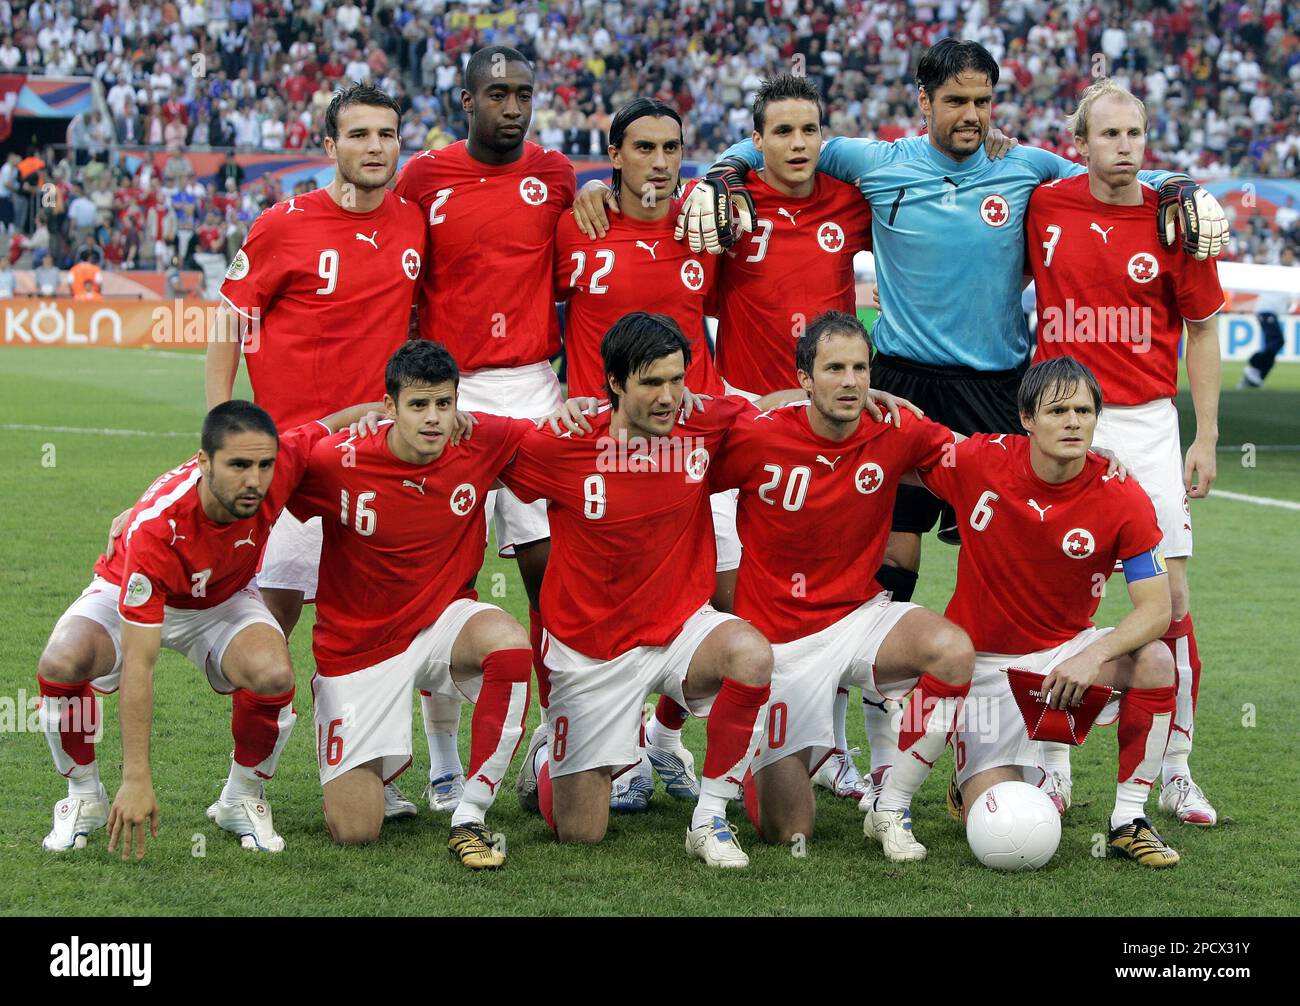 The Swiss national soccer team pose for a team group photo before the start of the World Cup Round of 16 soccer match between Switzerland and Ukraine in the World Cup stadium